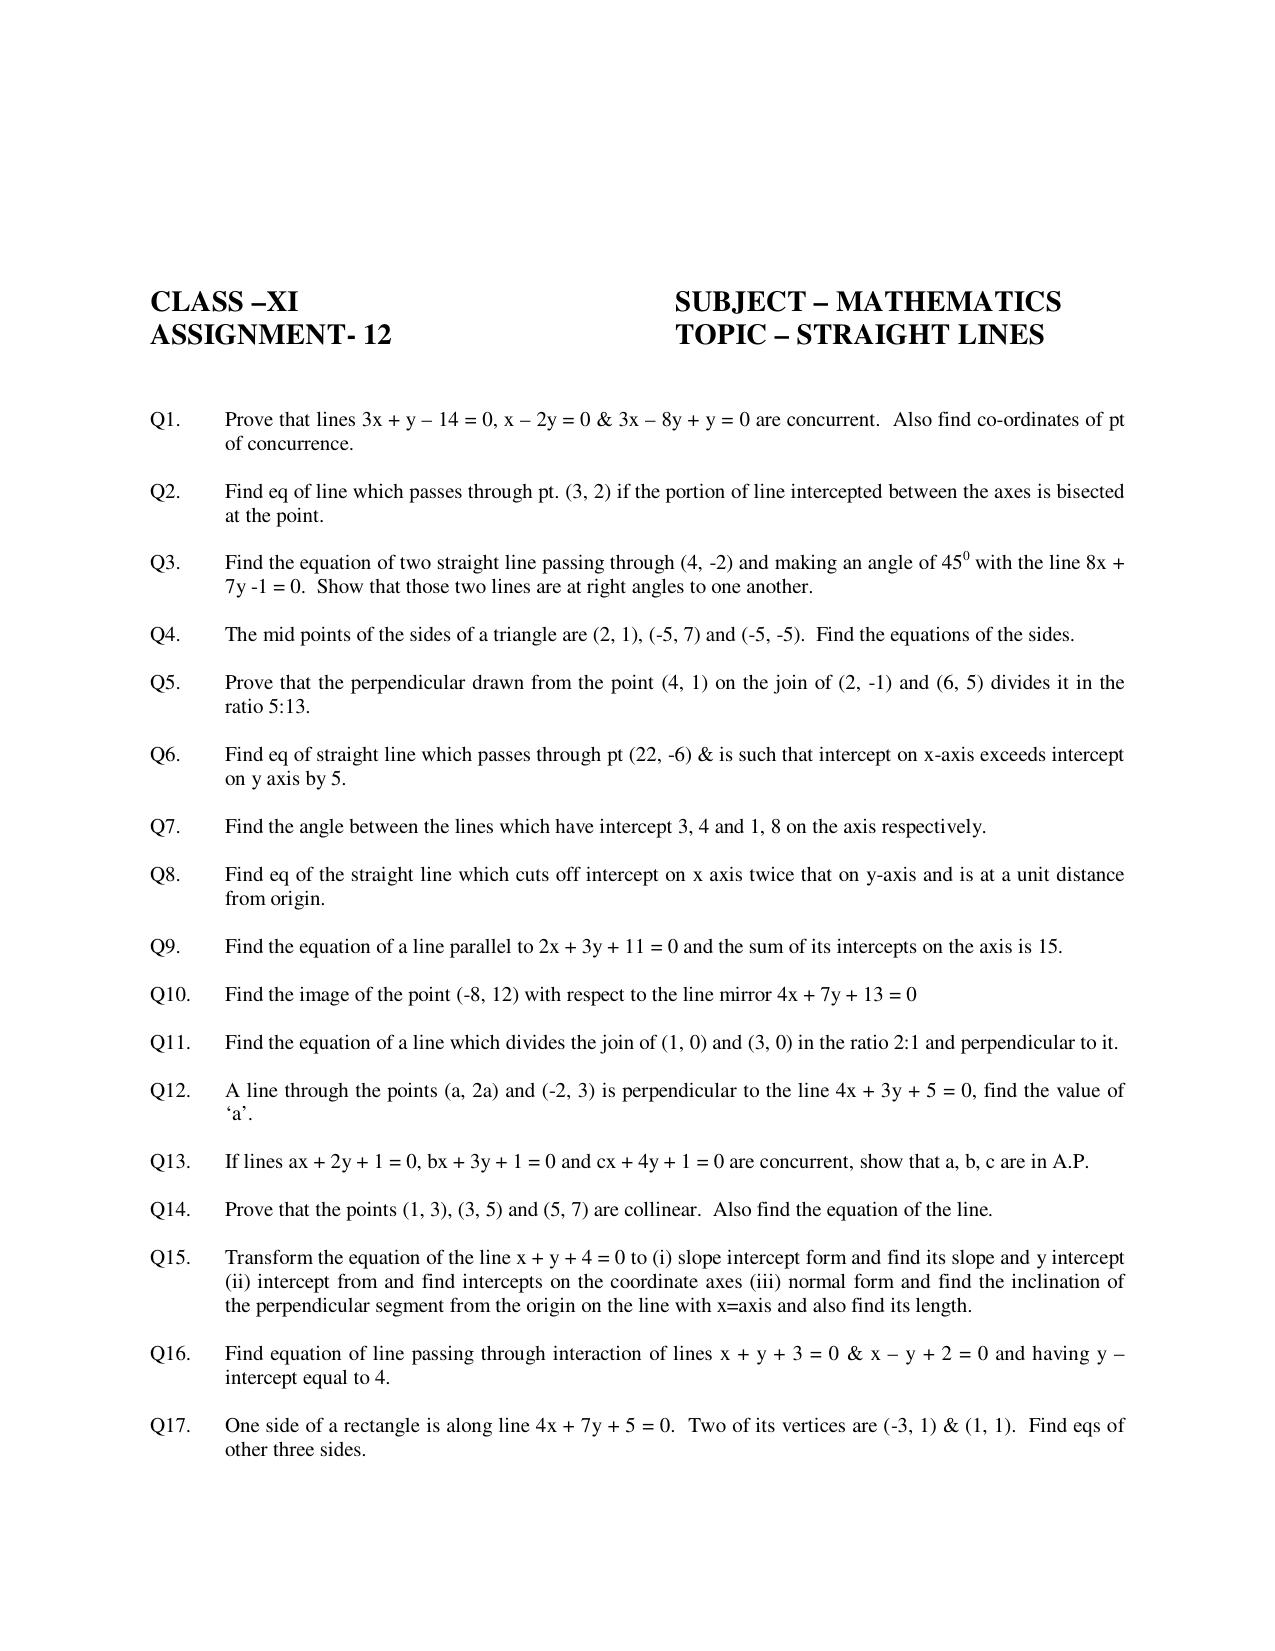 CBSE Worksheets for Class 11 Mathematics Straight Lines Assignment 2 - Page 1